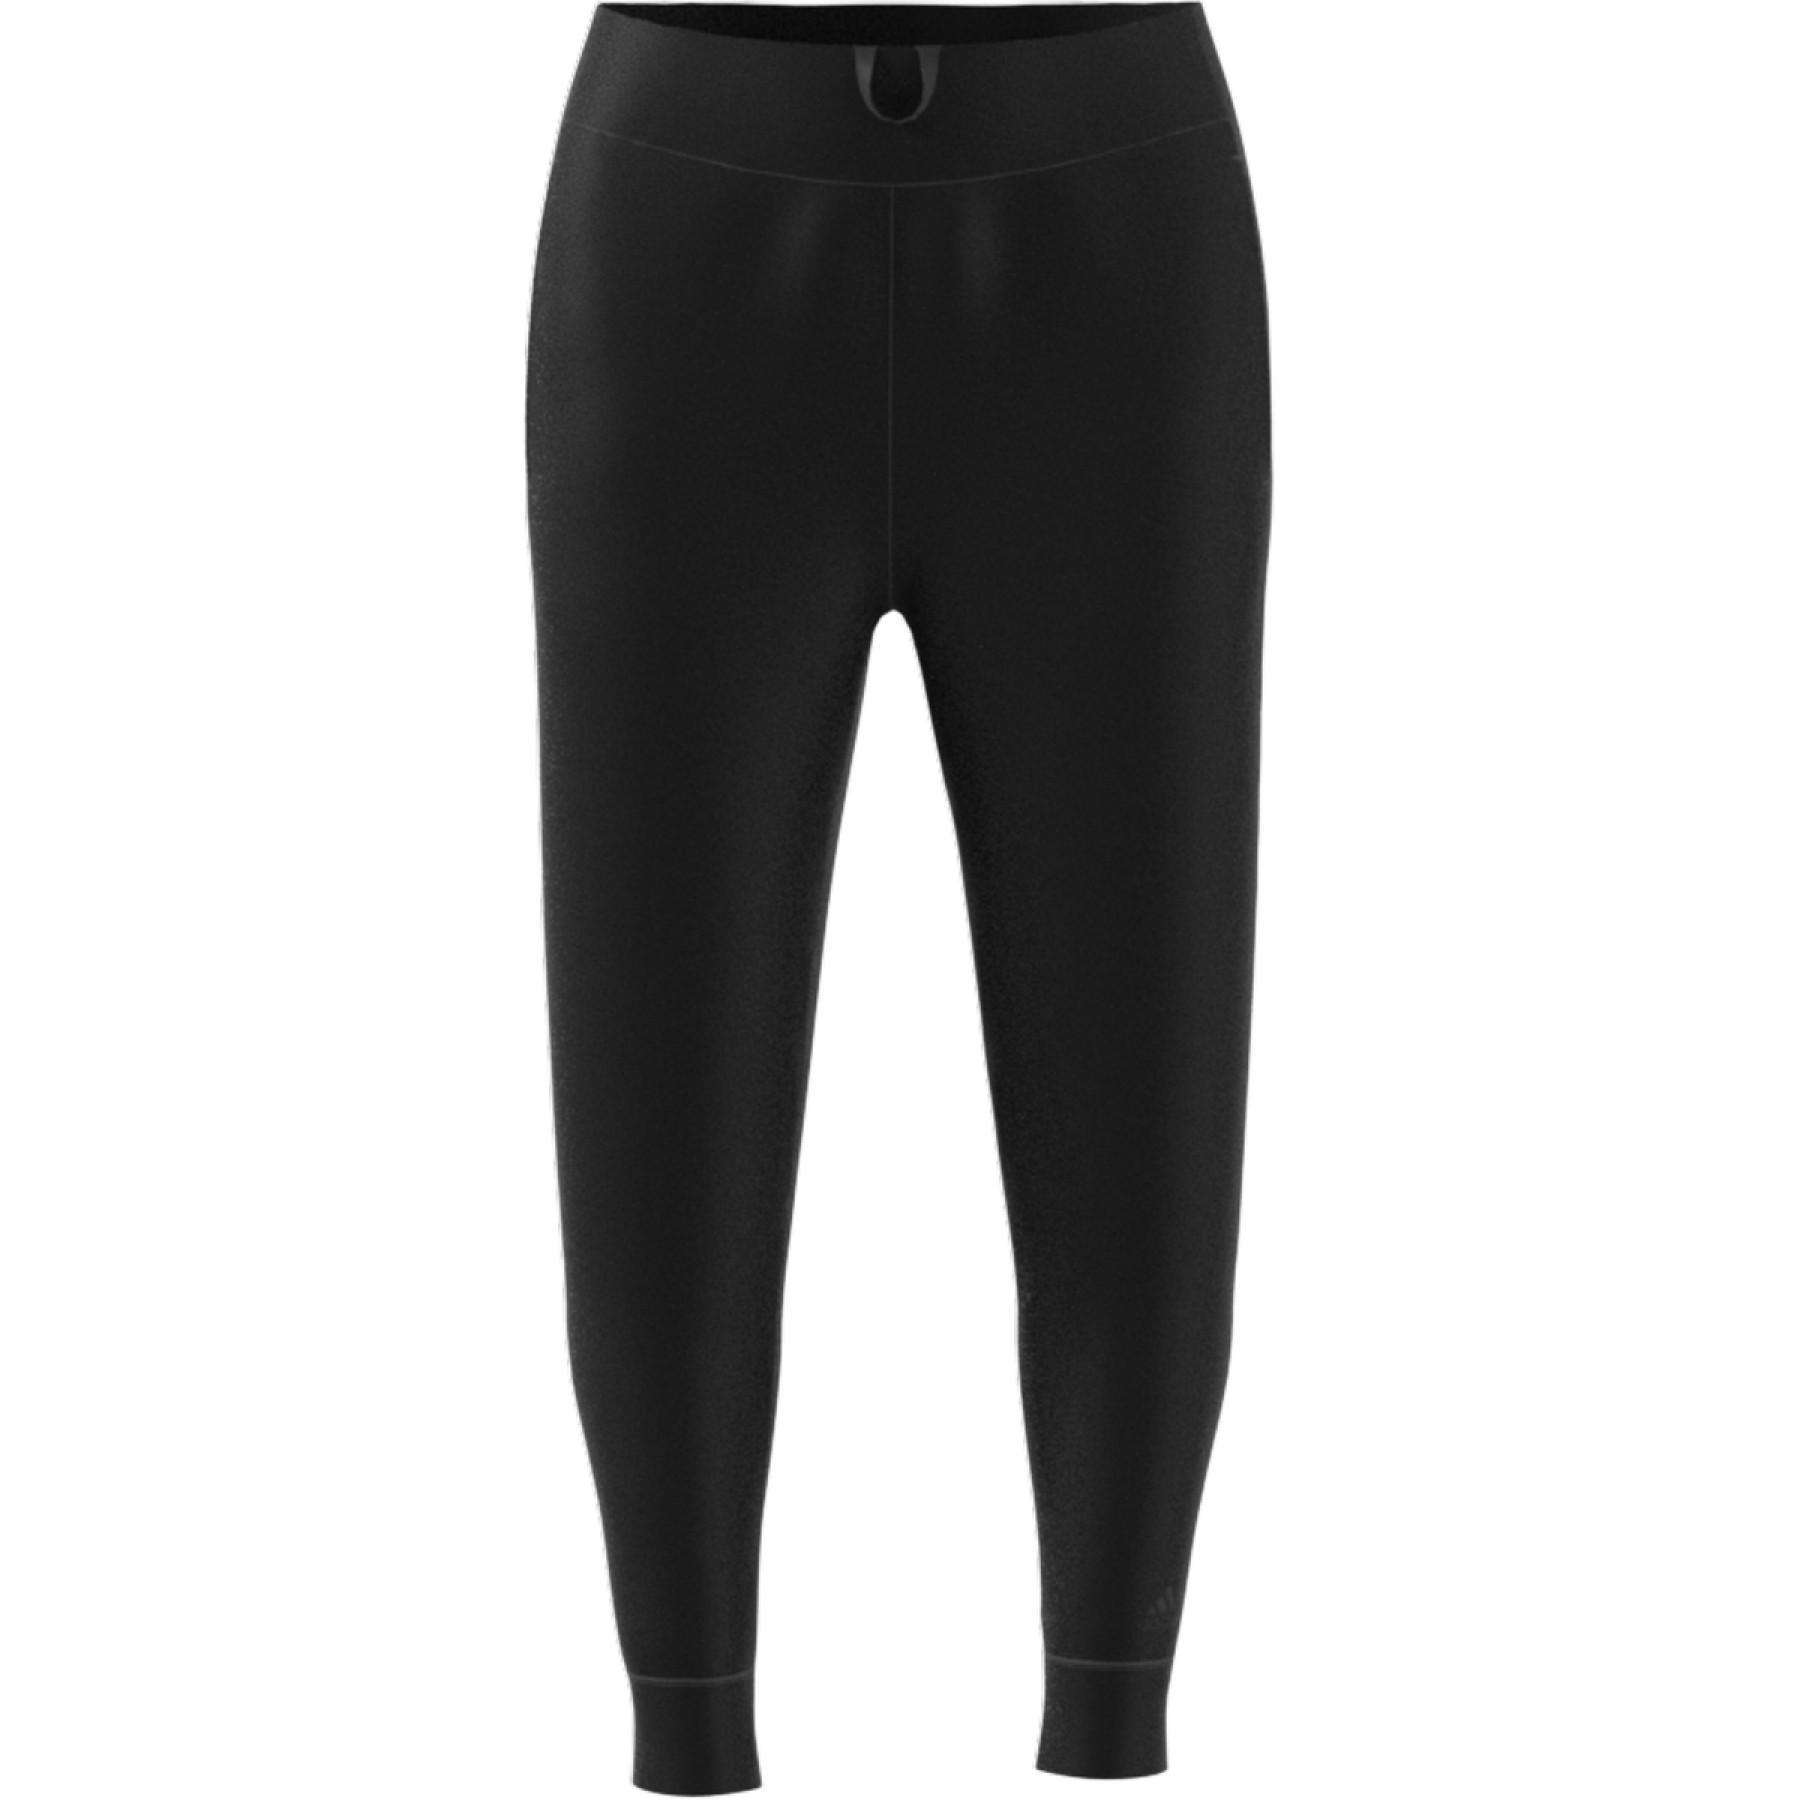 Women's trousers adidas Believe This 2.0 Knit Jogger